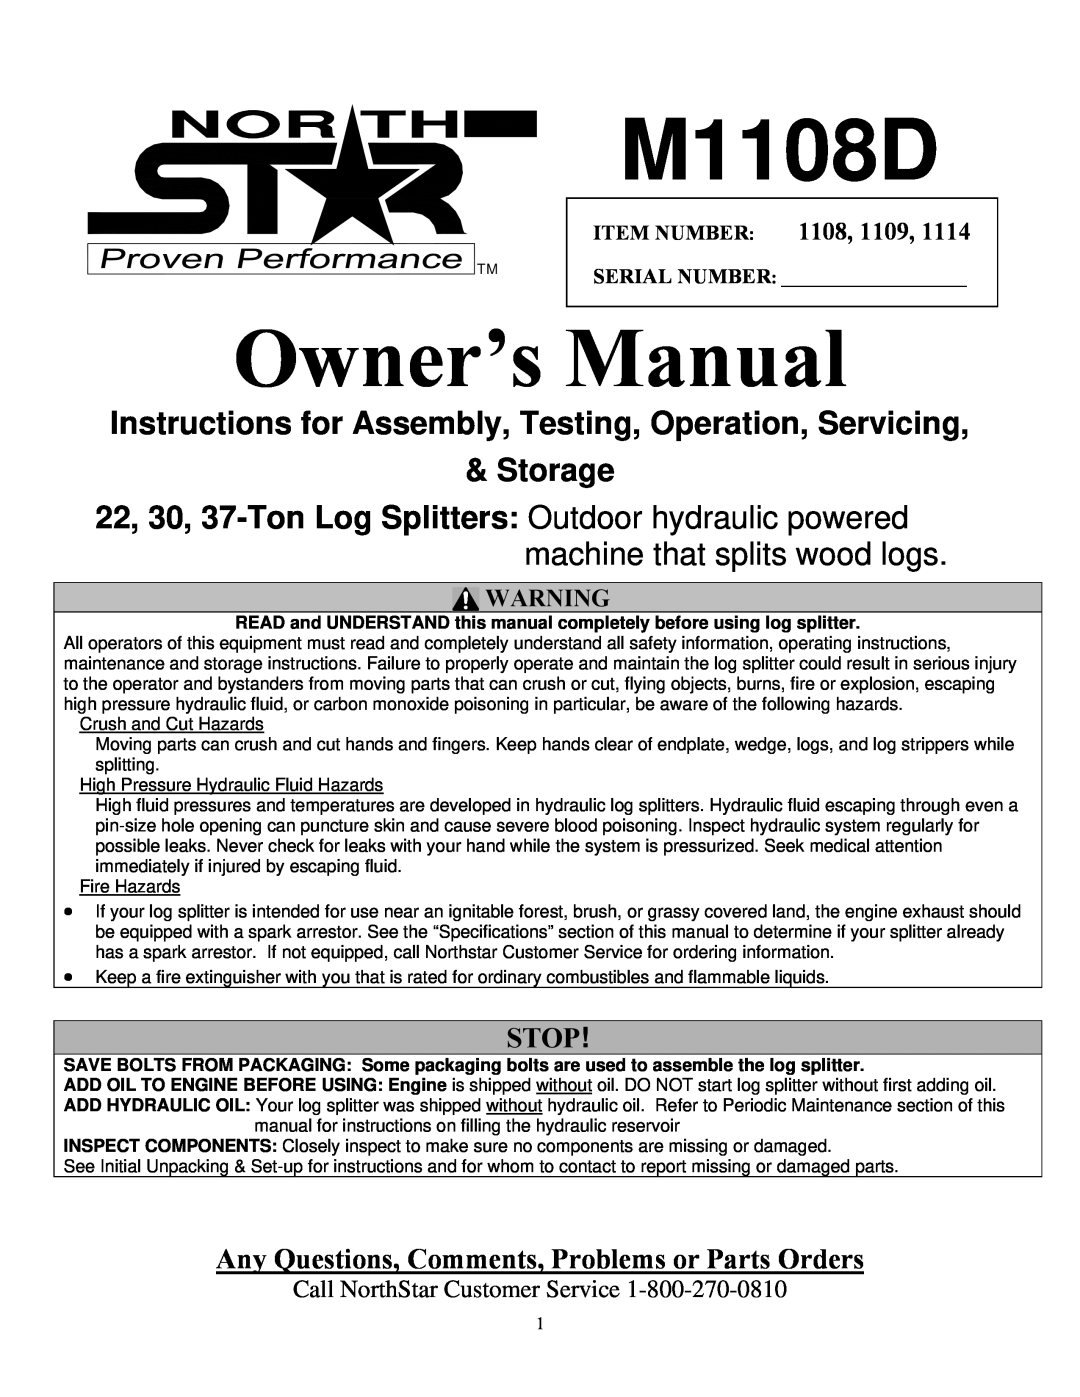 North Star M1108D owner manual Instructions for Assembly, Testing, Operation, Servicing Storage, Stop, Item Number 